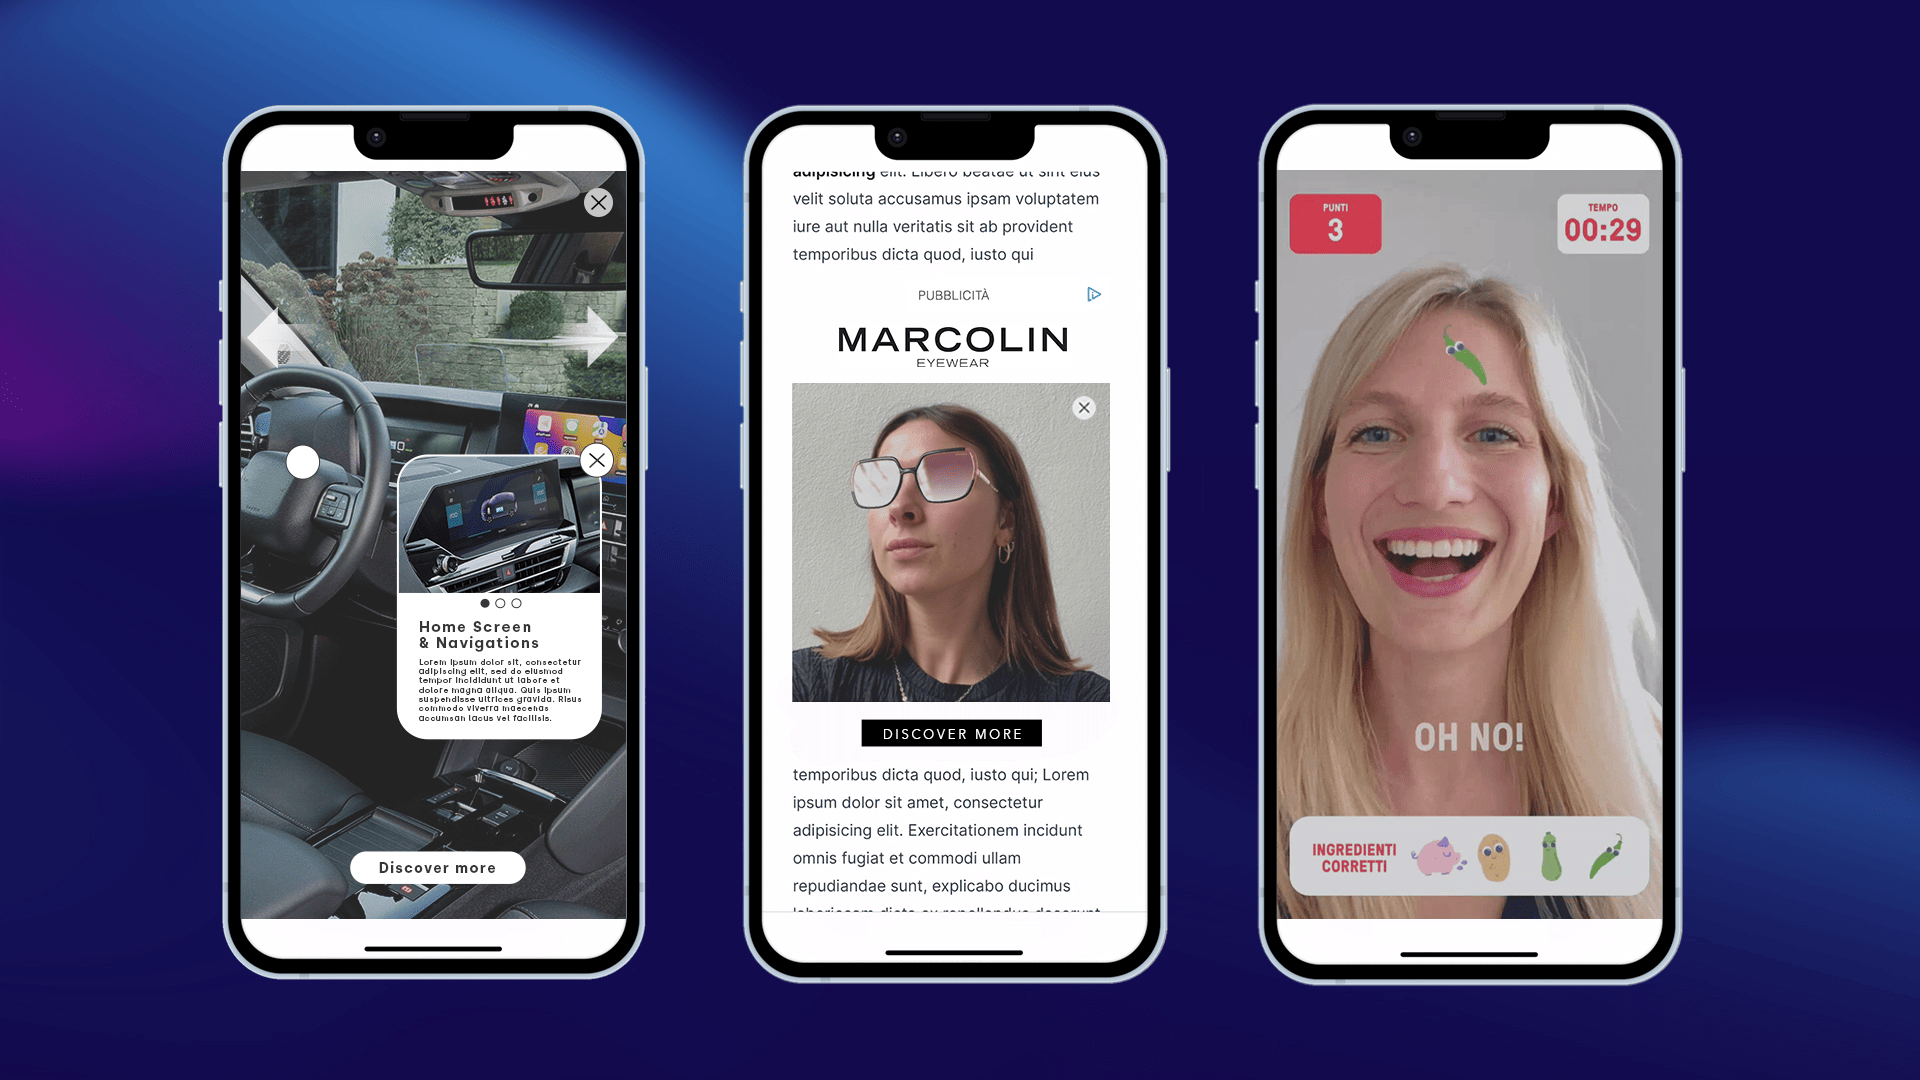 Example of immersive Rich Media applications in Advertising